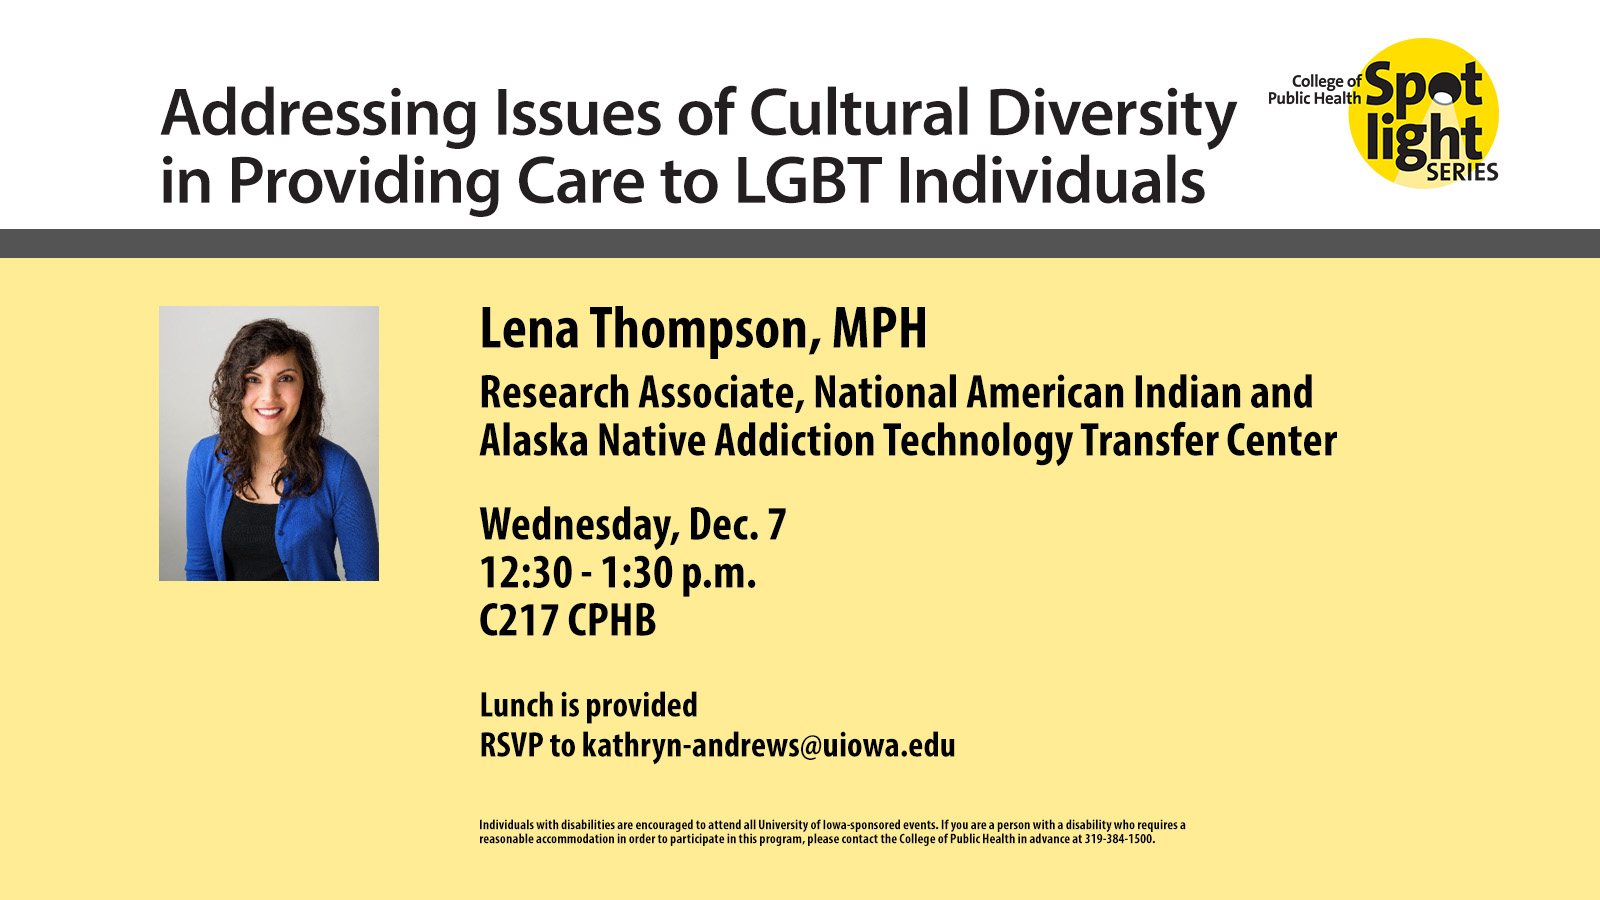 Cultural Diversity in Providing Care to LGBT individuals is Dec. 7 at CPHB